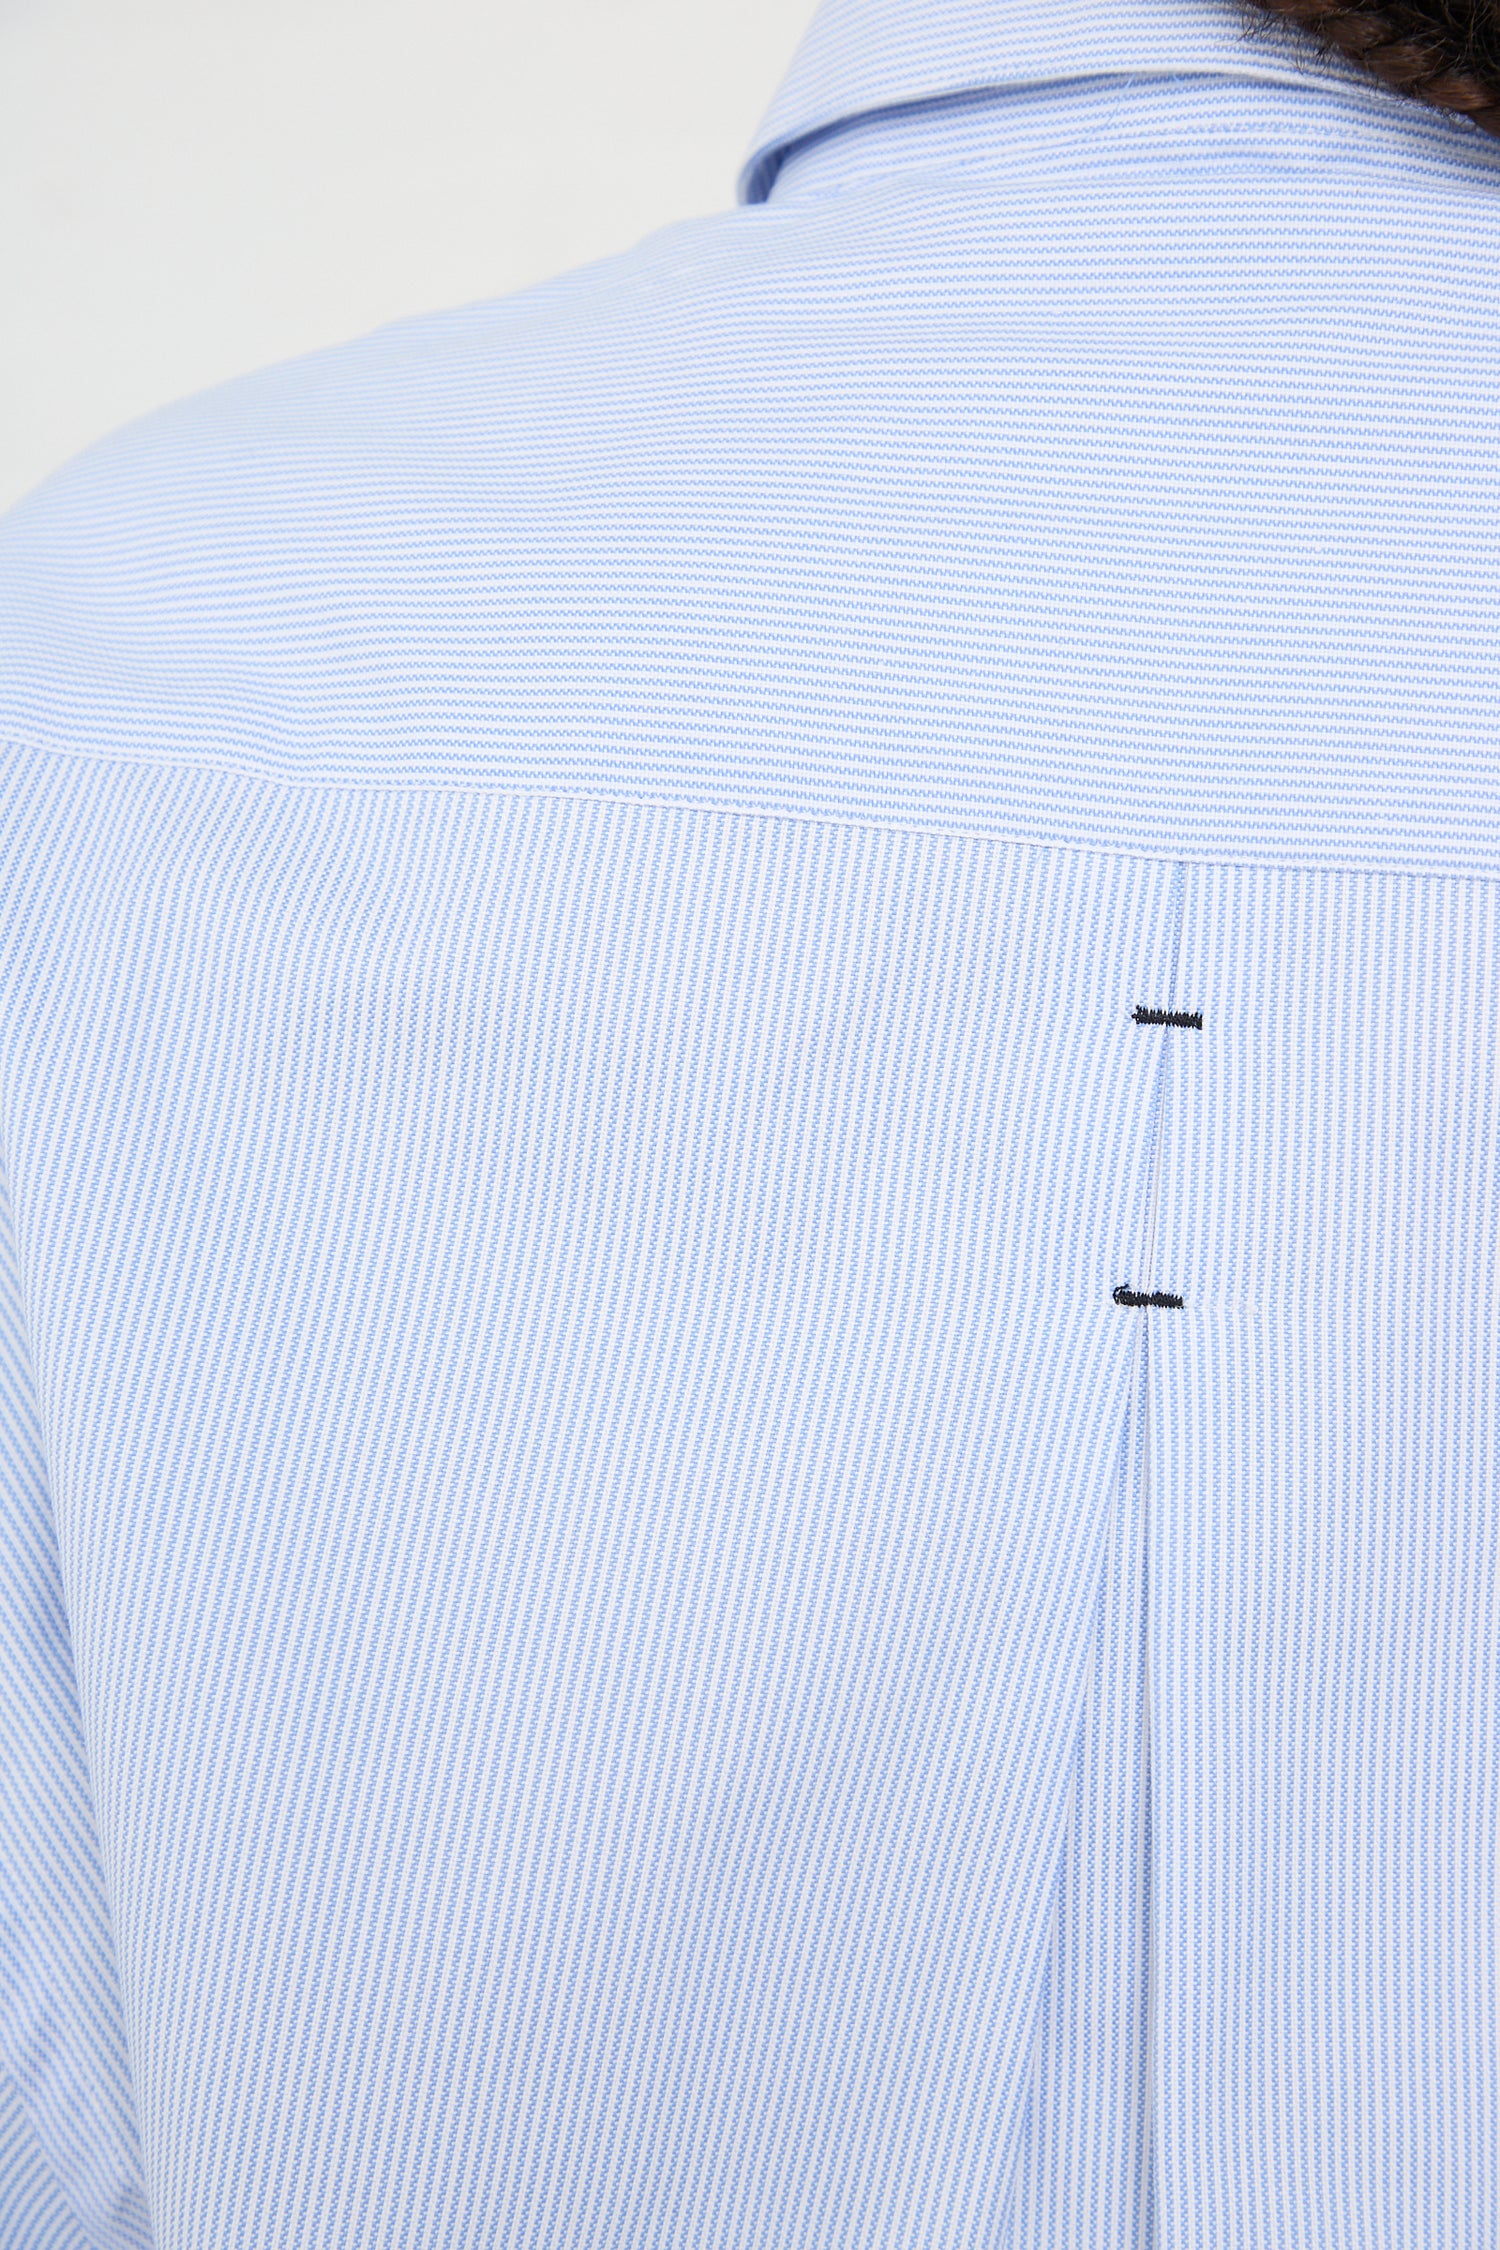 A close-up of the back of a person wearing an oversized, striped shirt made in Spain, with a detail showing the yoke and pleat with buttons - Cordera's Organic Oxford Shirt in Blue.